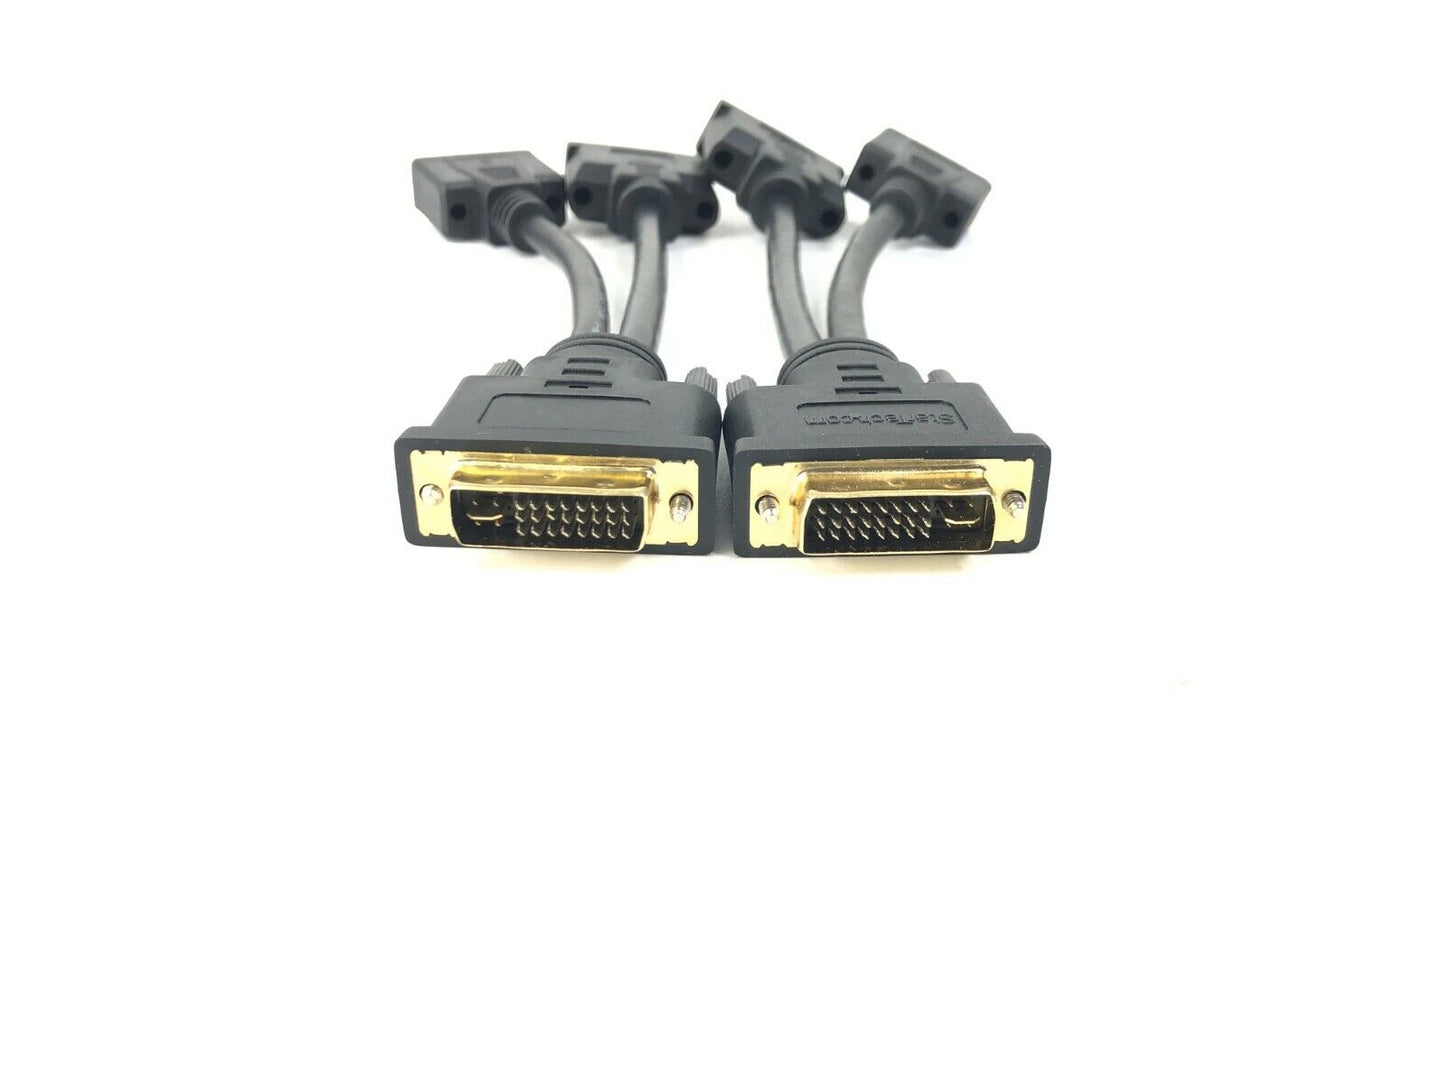 LOT OF 2 A/V Cables 8" Wyse Compatible DVI Splitter Cable-DVI-I to DVI-D&VGA-M/F